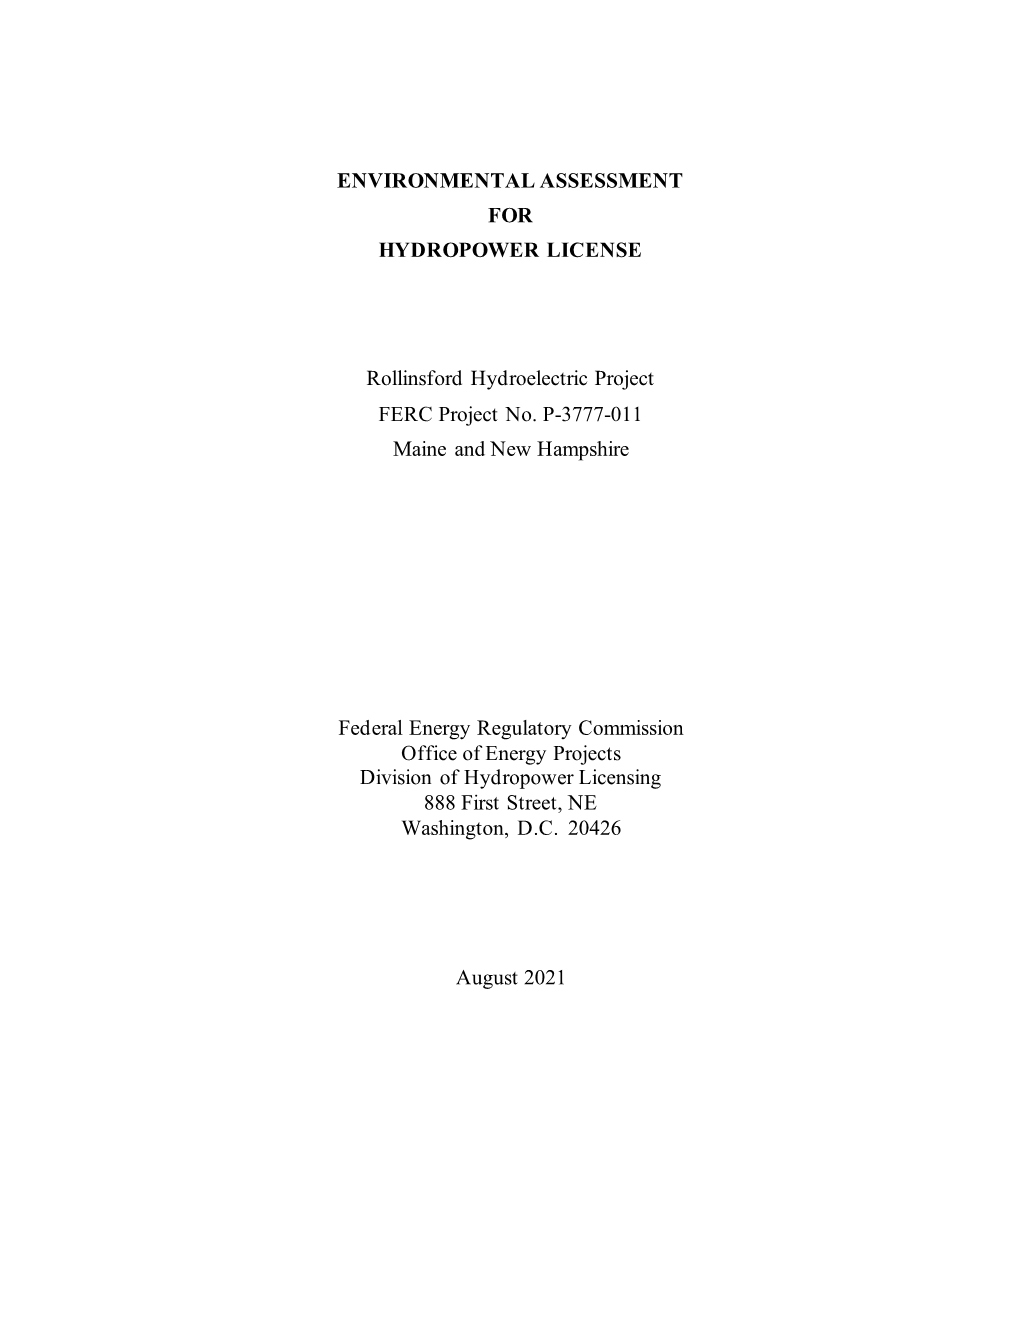 Environmental Assessment for Hydropower License